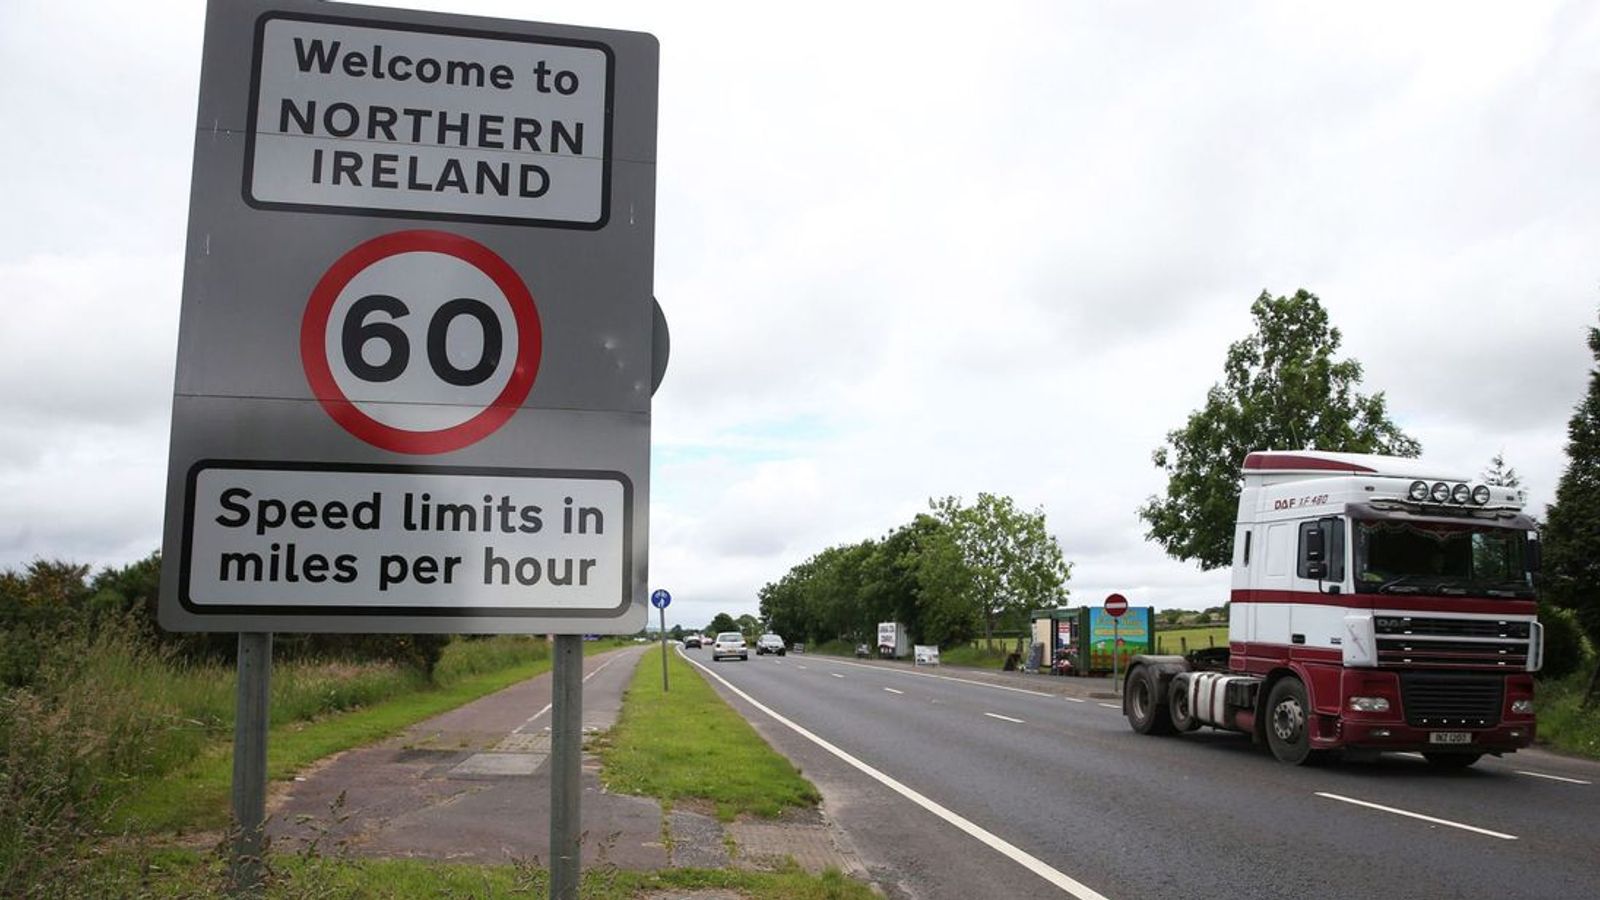 The Windsor Framework: What is in the new post-Brexit deal on Northern Ireland?